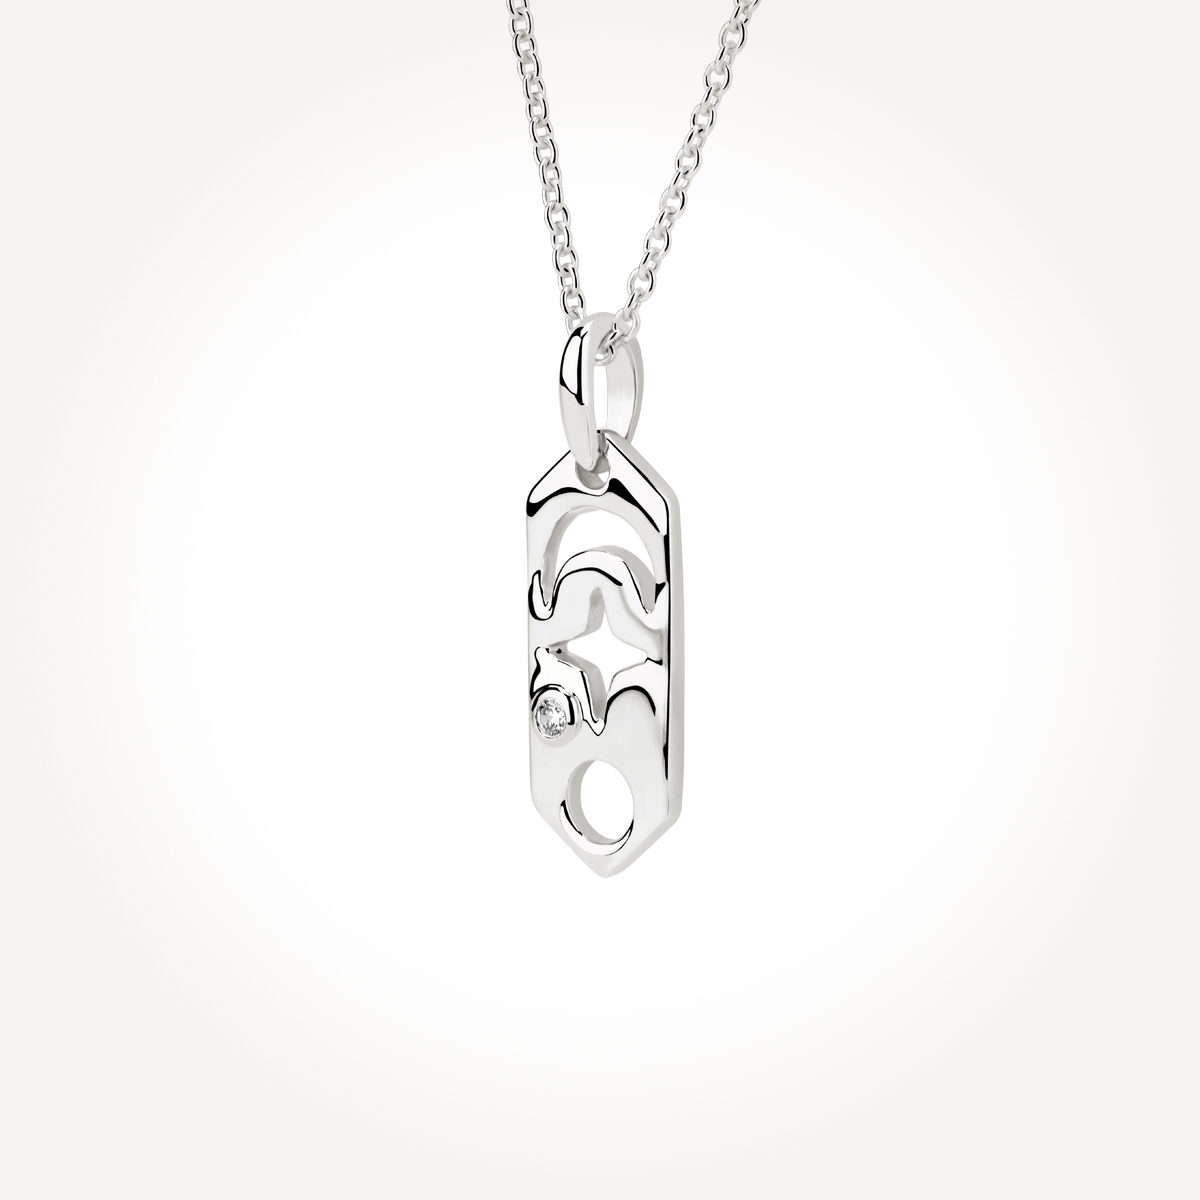 14KT White Gold Star and Moon Necklace